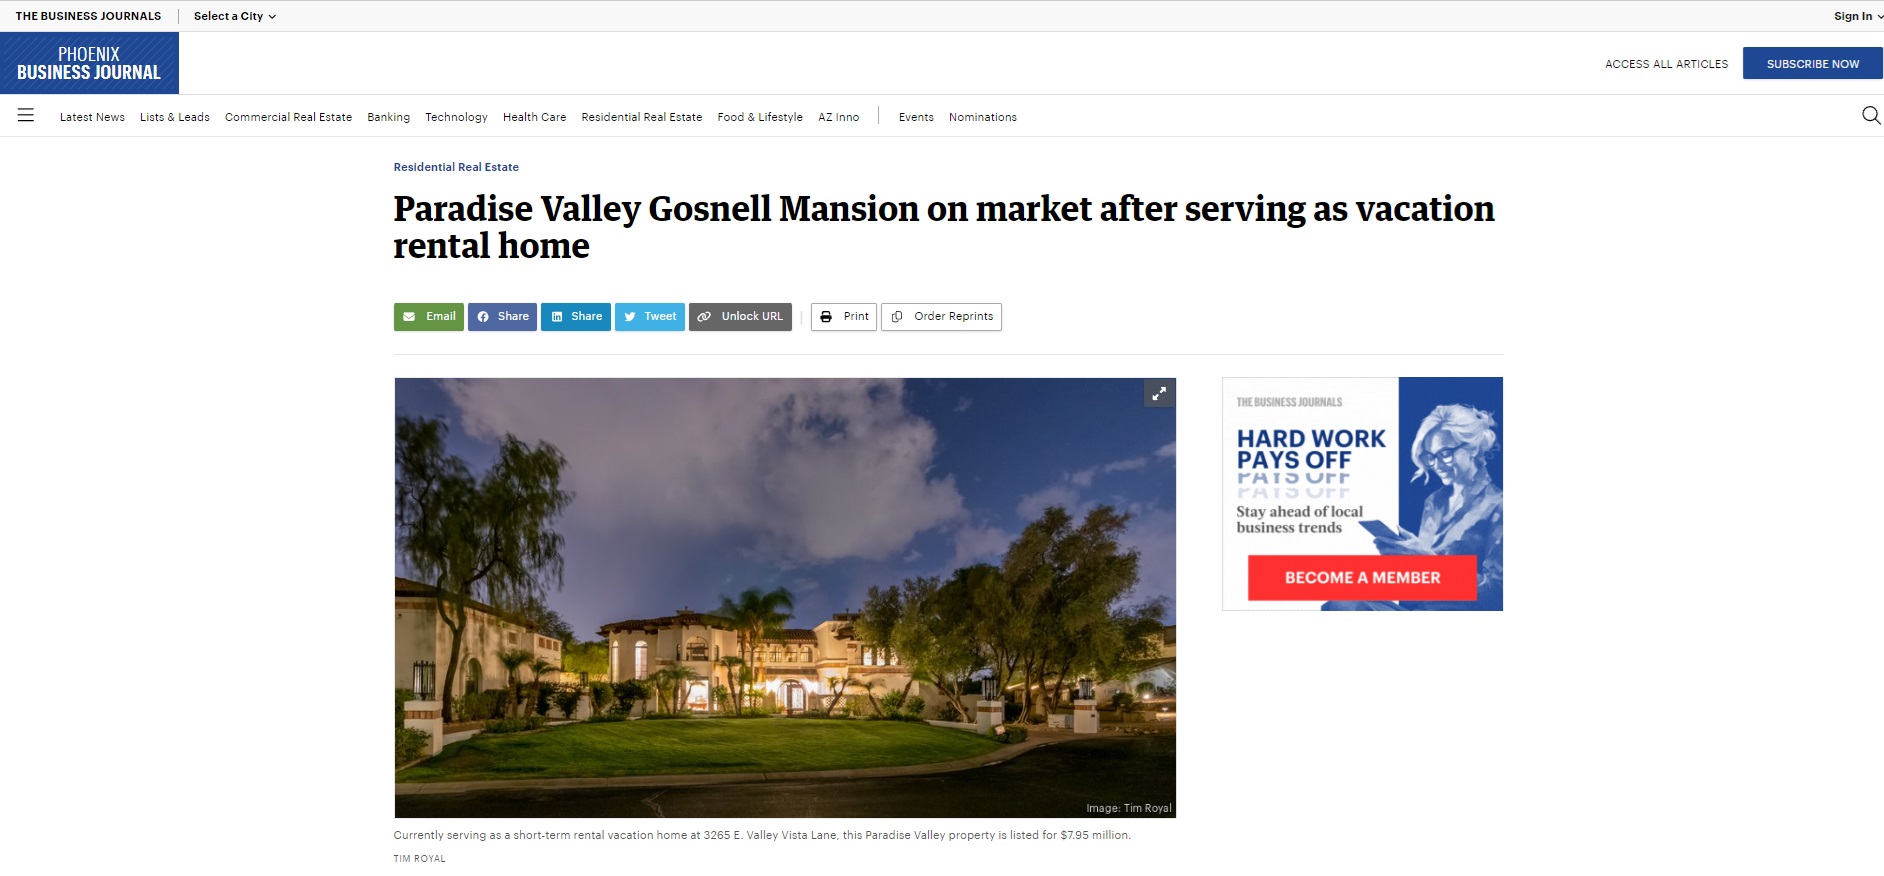 Phoenix Business Journal: Paradise Valley Gosnell Mansion on market